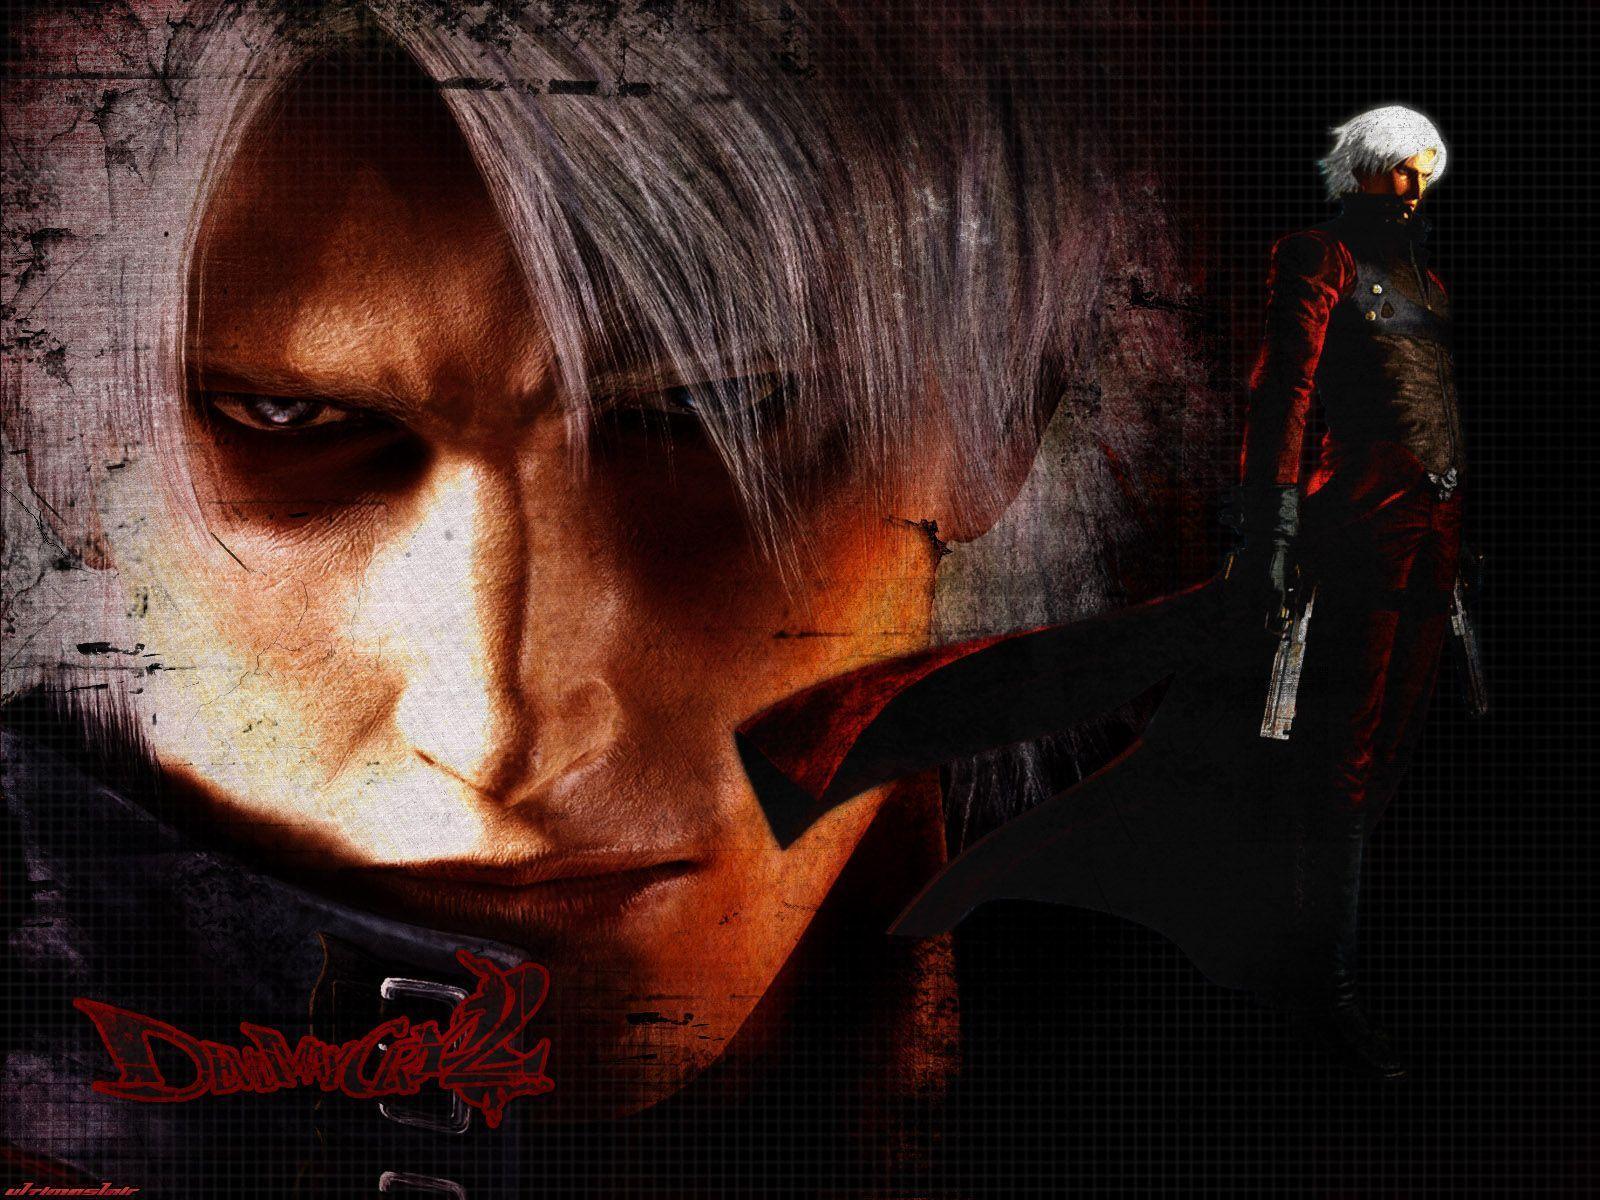 Devil May Cry 2 Dante New Wallpapers